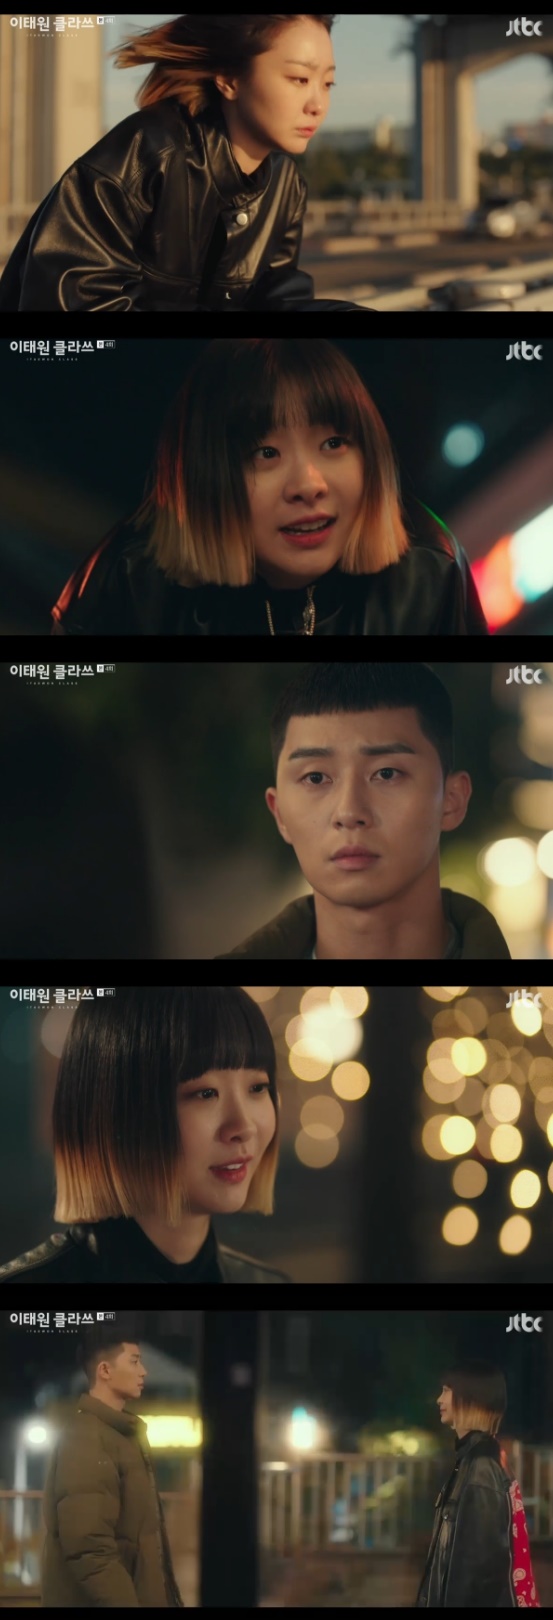 Kim Da-mi, who fell for Itaewon Clath Park Seo-joon, decided to fulfill his dream by Park Seo-joon.In the 4th episode of JTBCs gilt drama Itaewon Klath, which was broadcast on the 8th, Oh Soo-ah (Kwon Na-ra) confirmed the heart of Park Sae-ro-yi (Park Seo-joon).While Park Sae-ro-yi was suspended on the day, Joe-yool Lee (Kim Da-mi) became an adult.Joe-yool Lee, who passed the university, had a new life waiting, but it was just bored: Park Sae-ro-yi.Joe-yool Lee was also helped by Park Sae-ro-yi at Itaewon.Joe-yool Lee asked Park Sae-ro-yi, who was with Oh Soo-ah, to go to the cafe, telling him about the store promotion; the three who eventually went to the cafe together.Oh Soo-ah said he was a friend to Joe-yool Lee, who asked him what he was up to, but said, Park Sae-ro-yi likes me.While Park Sae-ro-yi was away for a while, Oh Soo-ah asked Joe-yool Lee if he liked Park Sae-ro-yi.When Joe-yool Lee said he was interested, Oh Soo-ah said Joe-yool Lee, who looked like a flower in a greenhouse, was not a man to handle.Joe-yool Lee then said, Did you see me a few times on SNS and get me? Attempted murder, ex-con? Is that what you mean?Joe-yool Lee also noticed that the person who reported it was Oh Soo-ah, but Oh Soo-ah first told Park Sae-ro-yi, Its me who called the police.Still like me? asked Park Sae-ro-yi, who said Oh Soo-ah was good after hearing this. There must have been a reason.Oh Soo-ah went home with a firm look, and she looked tearful as she recalled what Park Sae-ro-yi had said in the past.When Joe-yool Lee said he was drunk, Park Sae-ro-yi said, Its that day was impressive.Joe-yool Lee says, The name of the store is also tacky. Park Sae-ro-yi says, My life is a bit bitter. I cant sleep well at night. I miss, I feel lonely, Im angry.I wanted a little more bitter night, my life, to be sweet. Drunk Park Sae-ro-yi fell asleep, and Joe-yool Lee looked at Park Sae-ro-yi and said, Its another.My heart is strange, he thought, wanting to sweeten the lonely Park Sae-ro-yi night.Joe-yool Lee realized, My mind is the stupidest thing a human can do, this impulse is not inhibited.Eventually Joe-yool Lee ran to Park Sae-ro-yi.Joe-yool Lee was confident of making Park Sae-ro-yi a great person, not just such a person, himself to achieve both love and success.Joe-yool Lee told Park Sae-ro-yi, Ill work here, Ill make my dream come true.Expectations gather on how the moonlight will change with Joe-yool Lees joining.Photo = JTBC Broadcasting Screen